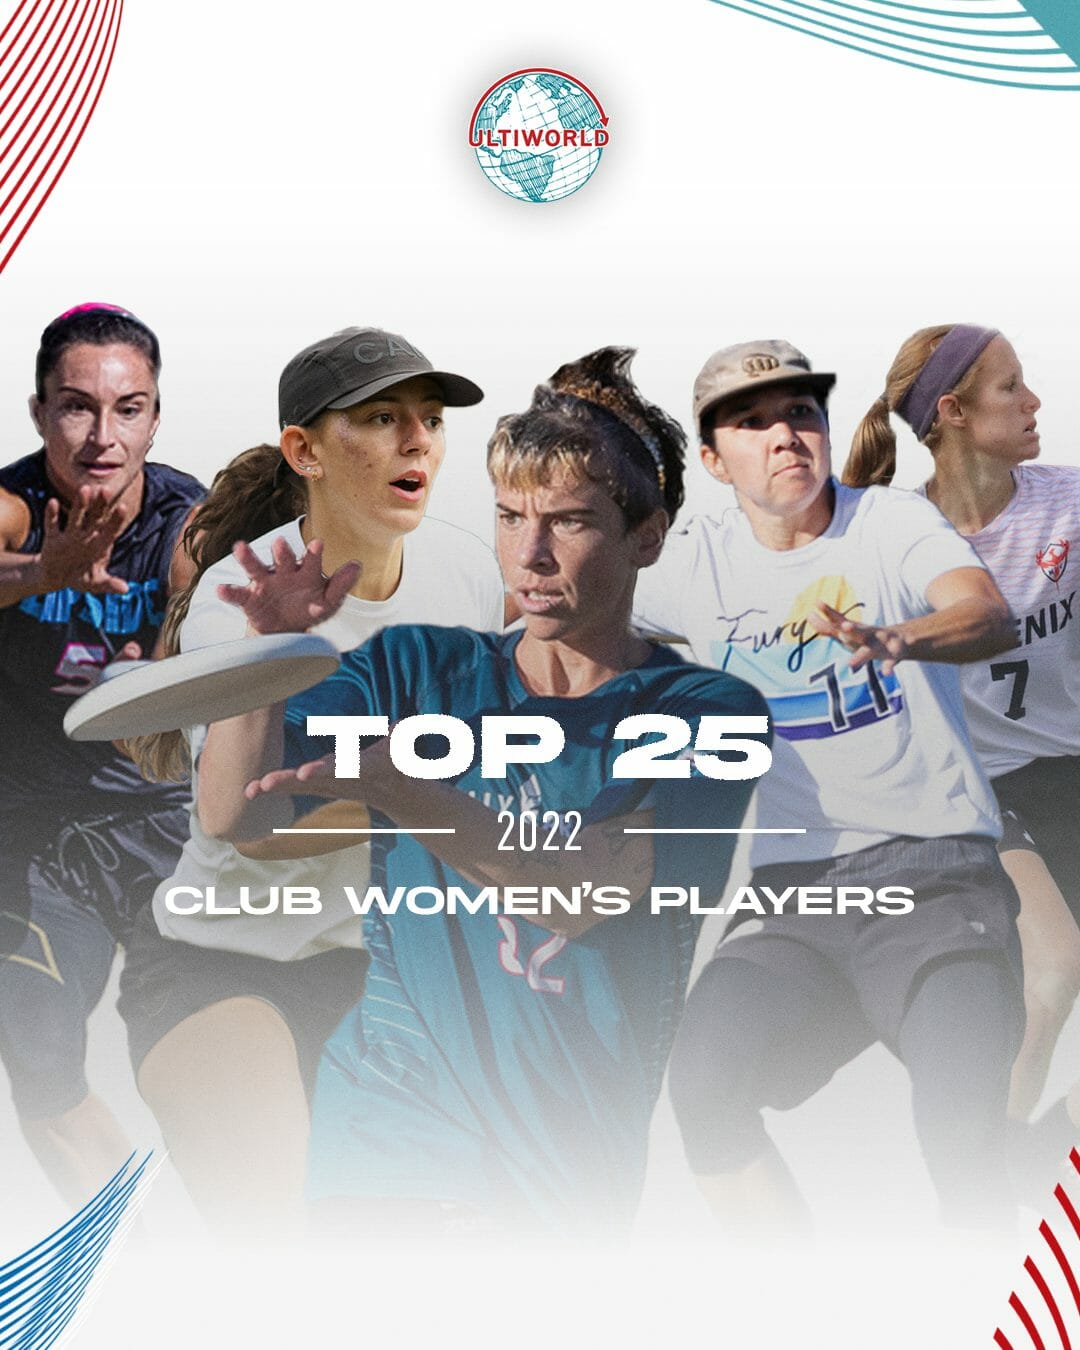 The Top 25 Club Women's Players in 2022 - Ultiworld